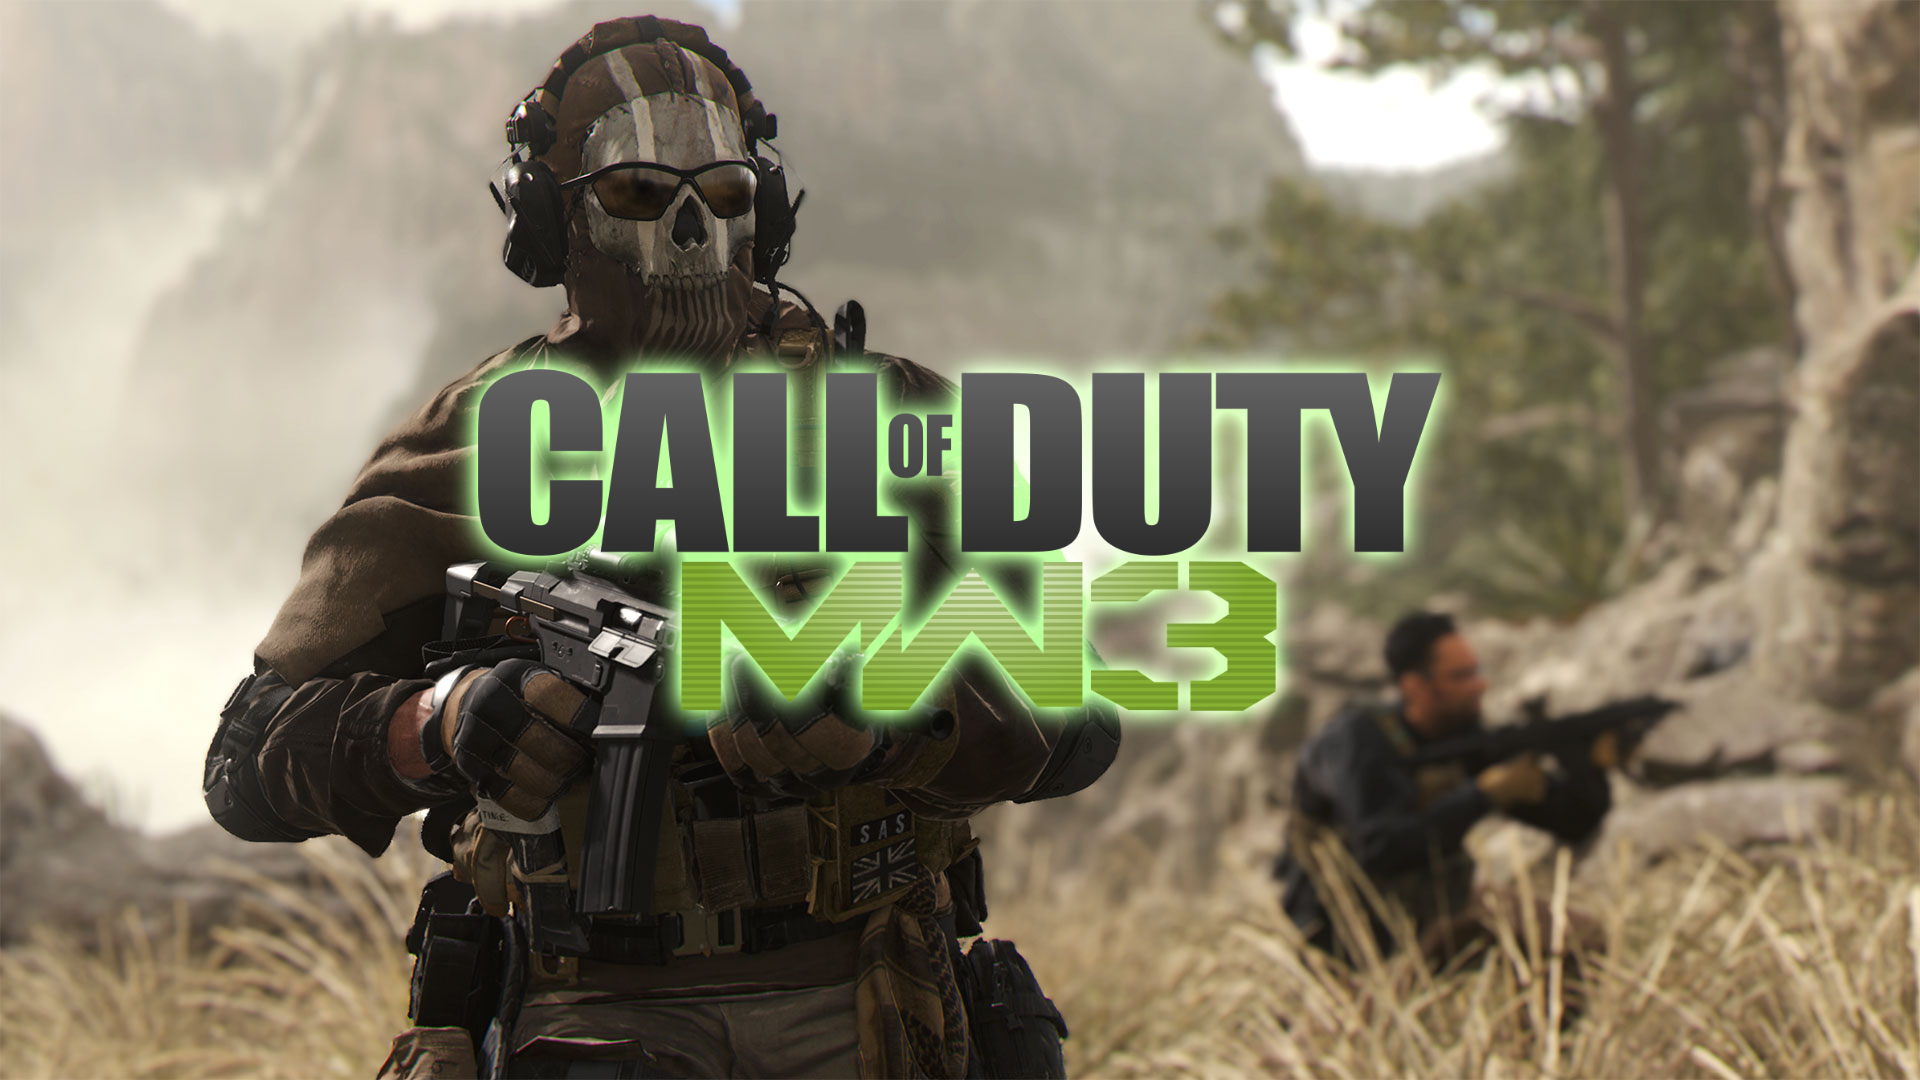 Announcement: Call of Duty: Modern Warfare III and Call of Duty: Warzone  Season 1. All You Need to Know